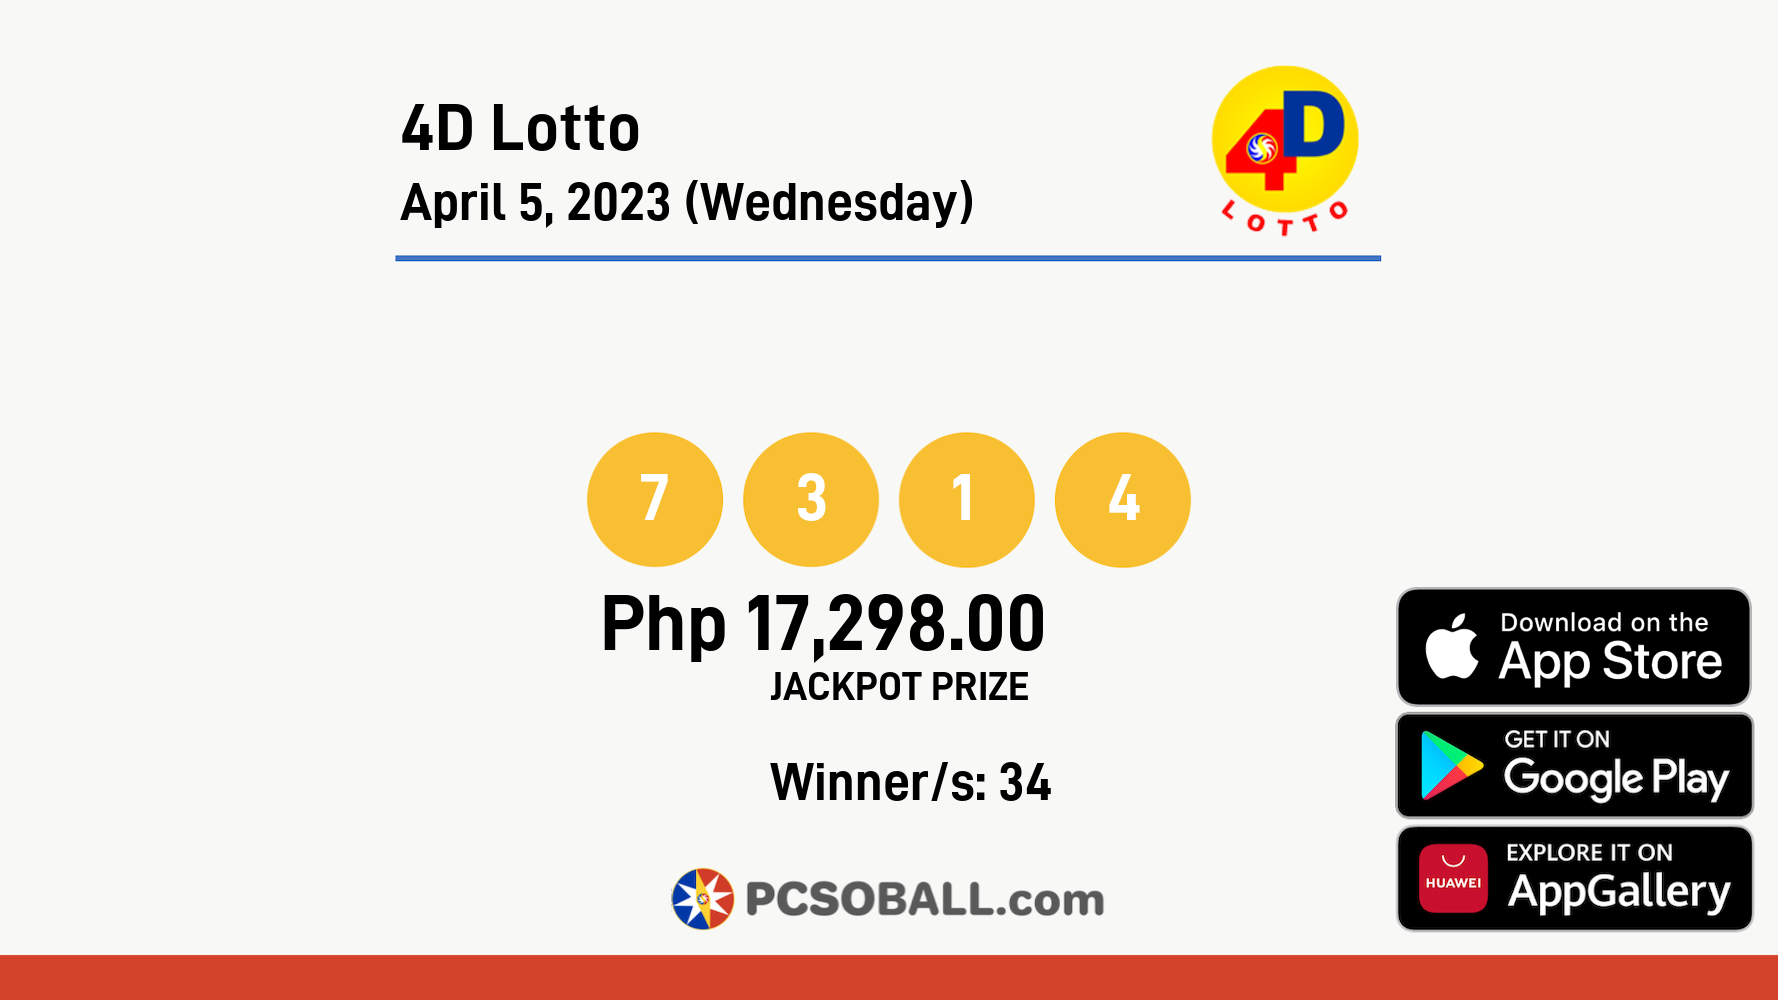 4D Lotto April 5, 2023 (Wednesday) Result